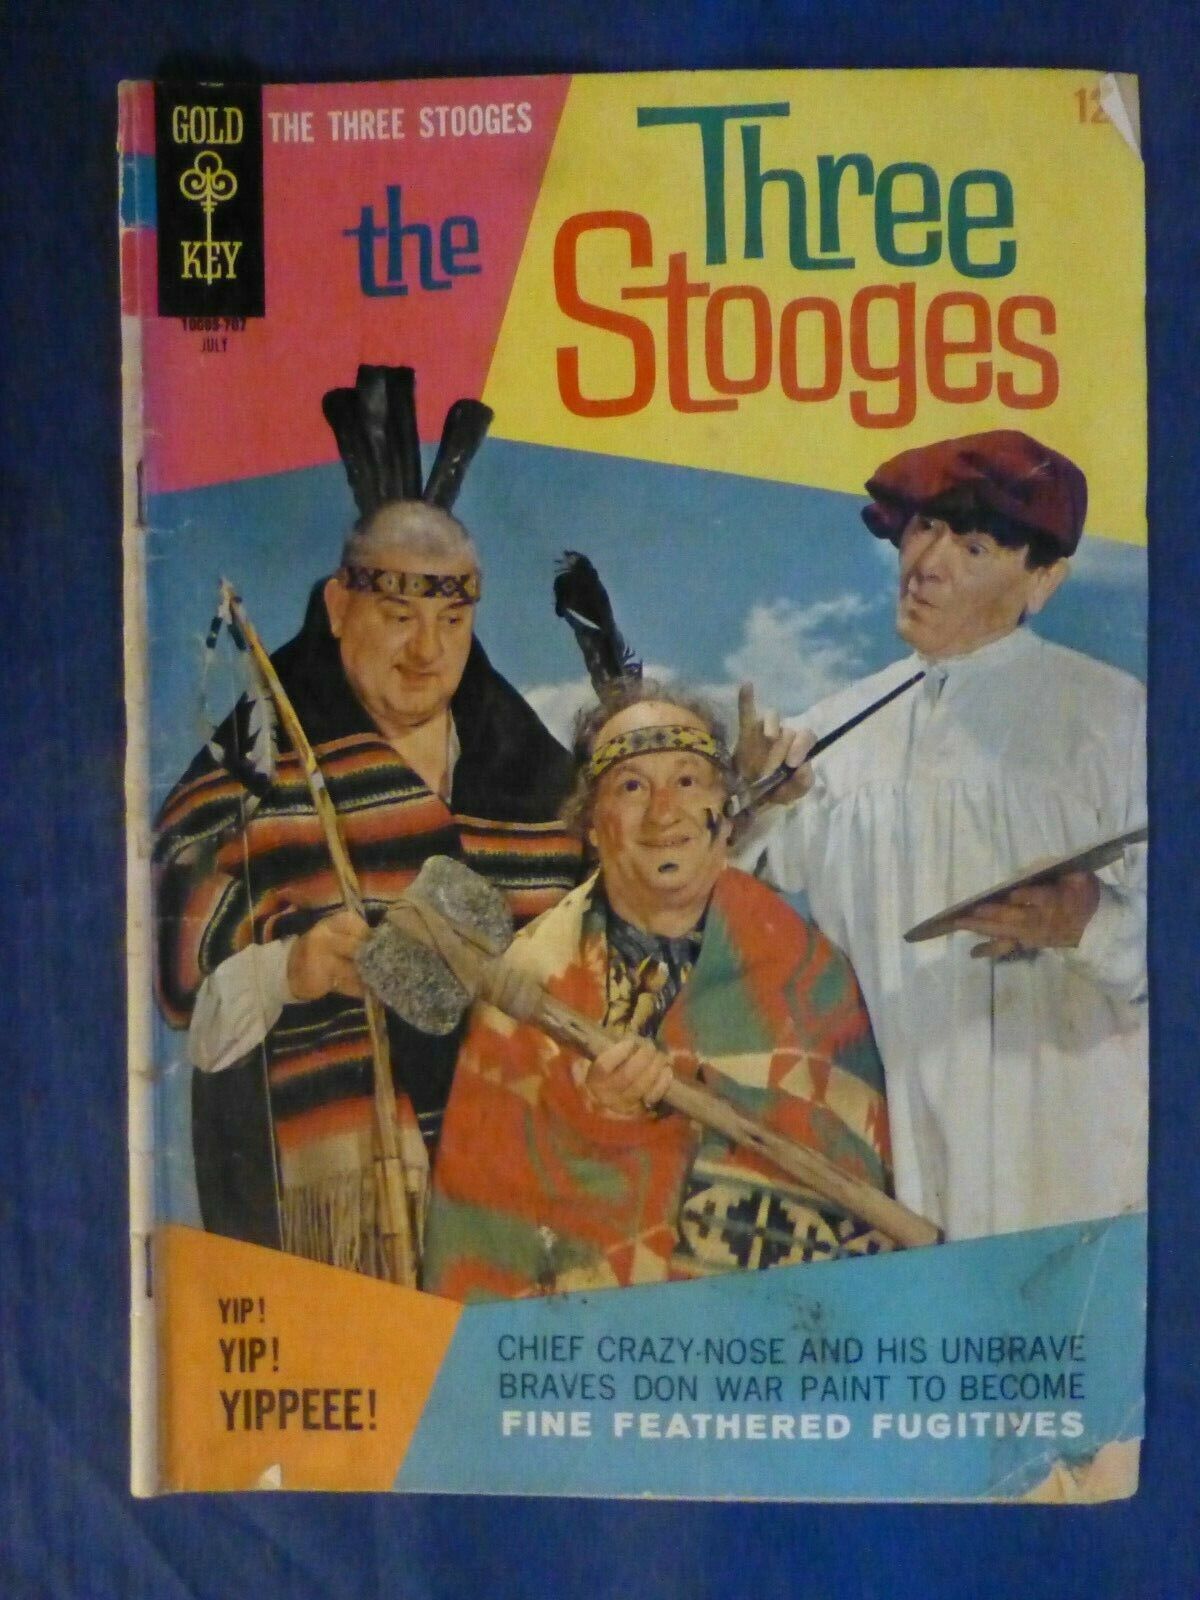  The Three Stooges Gold Key Comic Book #35 Published 1967